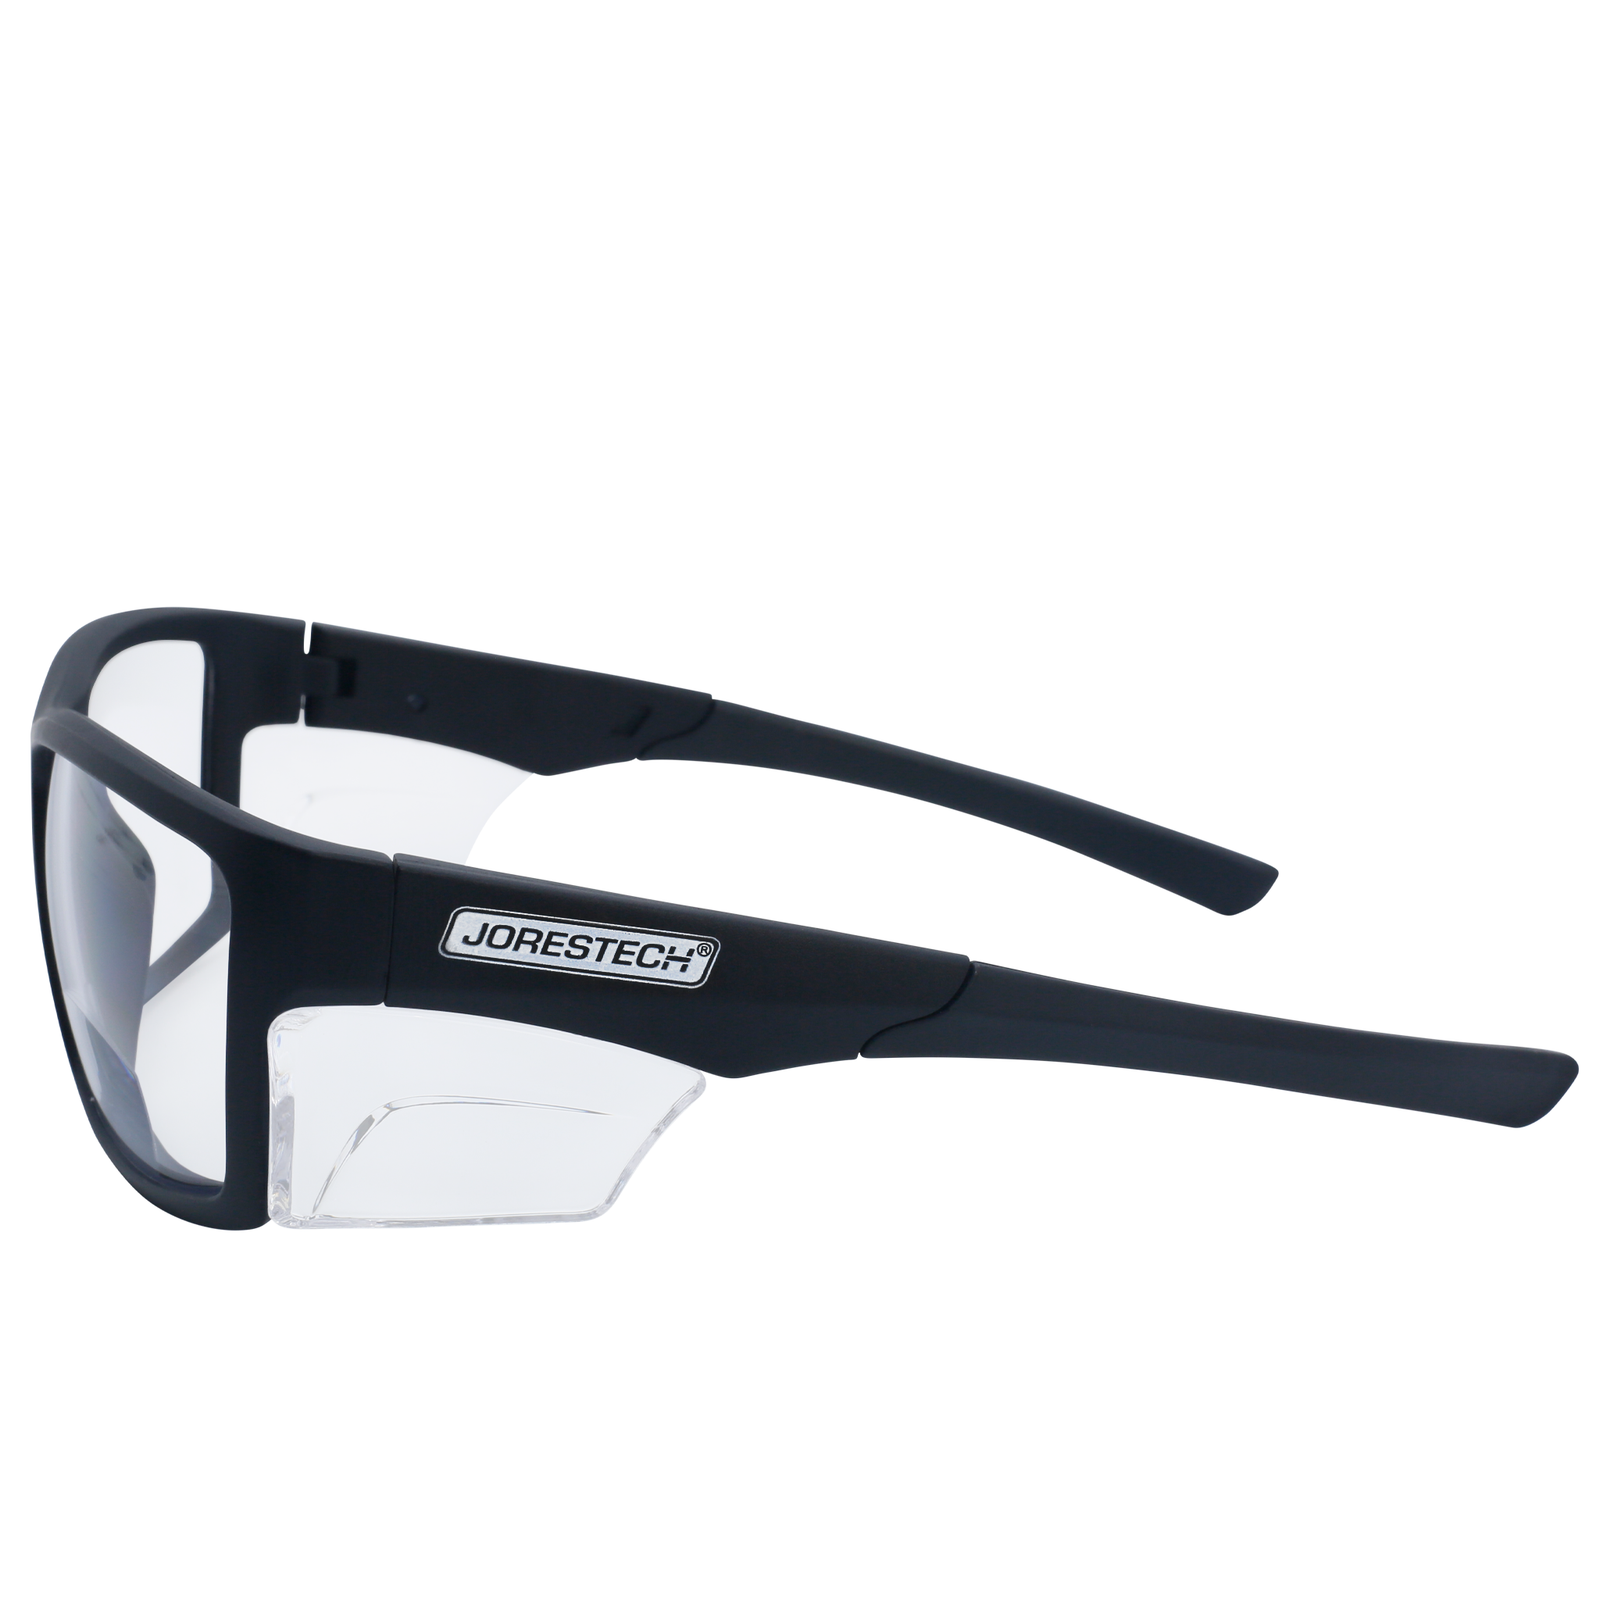 Shows side view of a bifocal ANSI compliant safety reader JORESTECH glass with side shield for high impact protection. These safety glasses have black frame and clear polycarbonate lenses. 